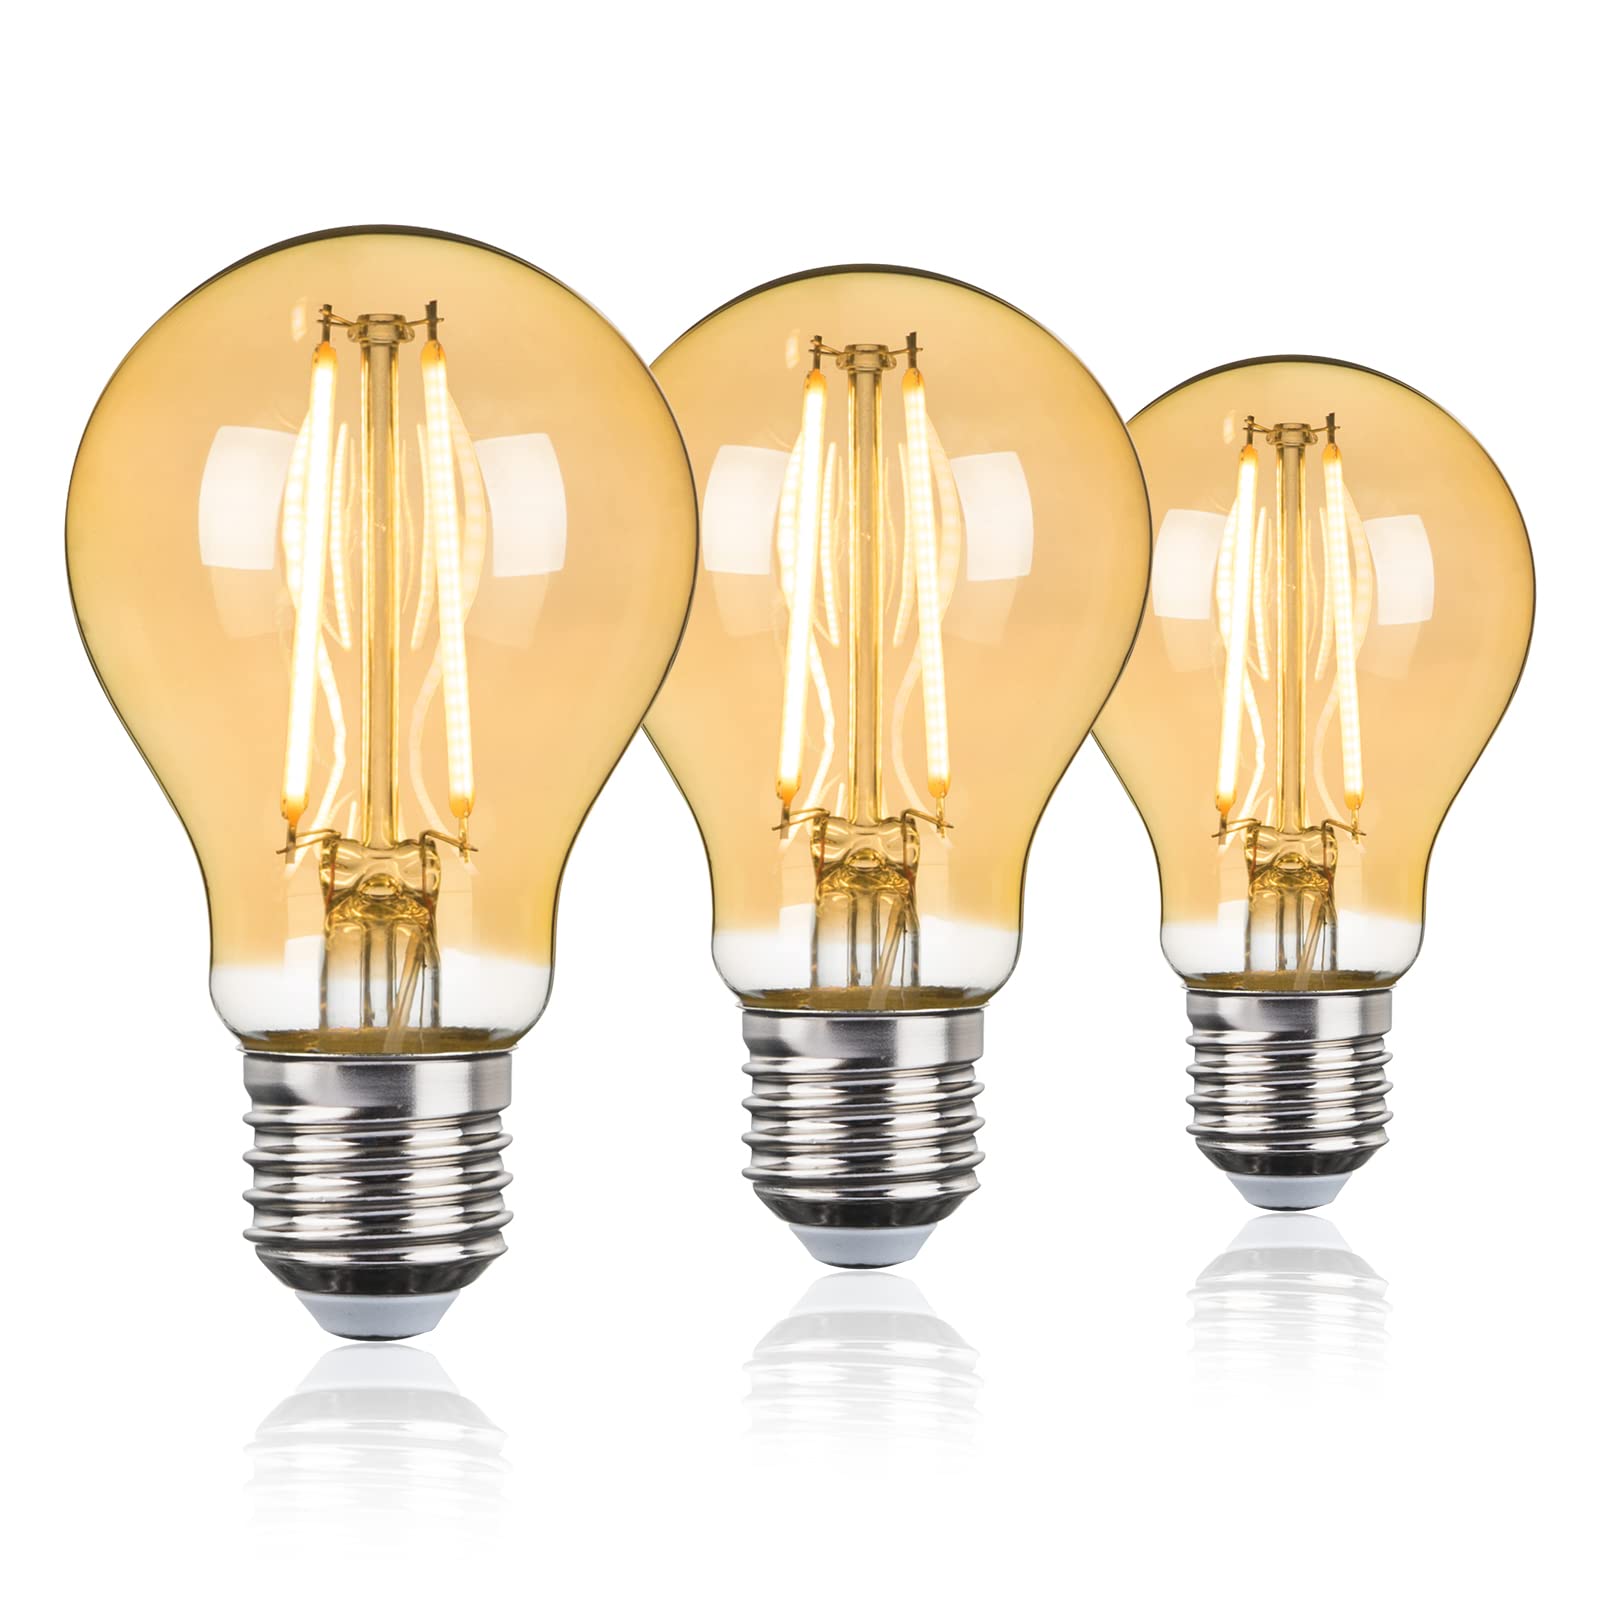 3Pack Dimmable Vintage Edison LED Bulbs, 9W 1000lm E27 Screw A60 LED Filament Bulb,100W Equivalent, 2700K Warm White Retro Amber Glass Decoration Light Bulb for Restaurant Cafe Bar[Energy Class A++]